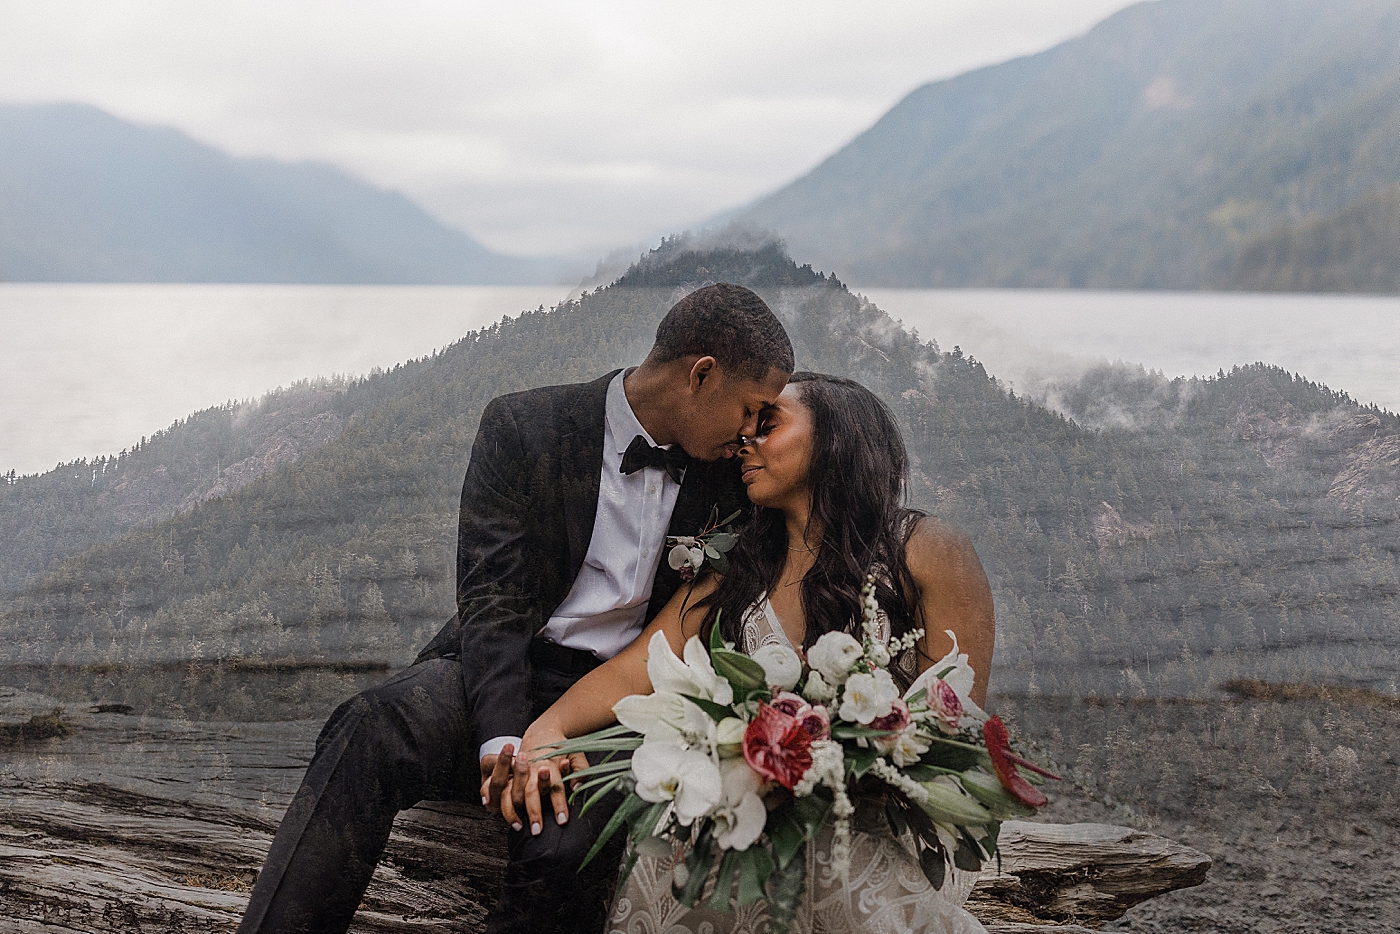 Double exposure of bride and groom at Lake Crescent | Photo by Megan Montalvo Photography